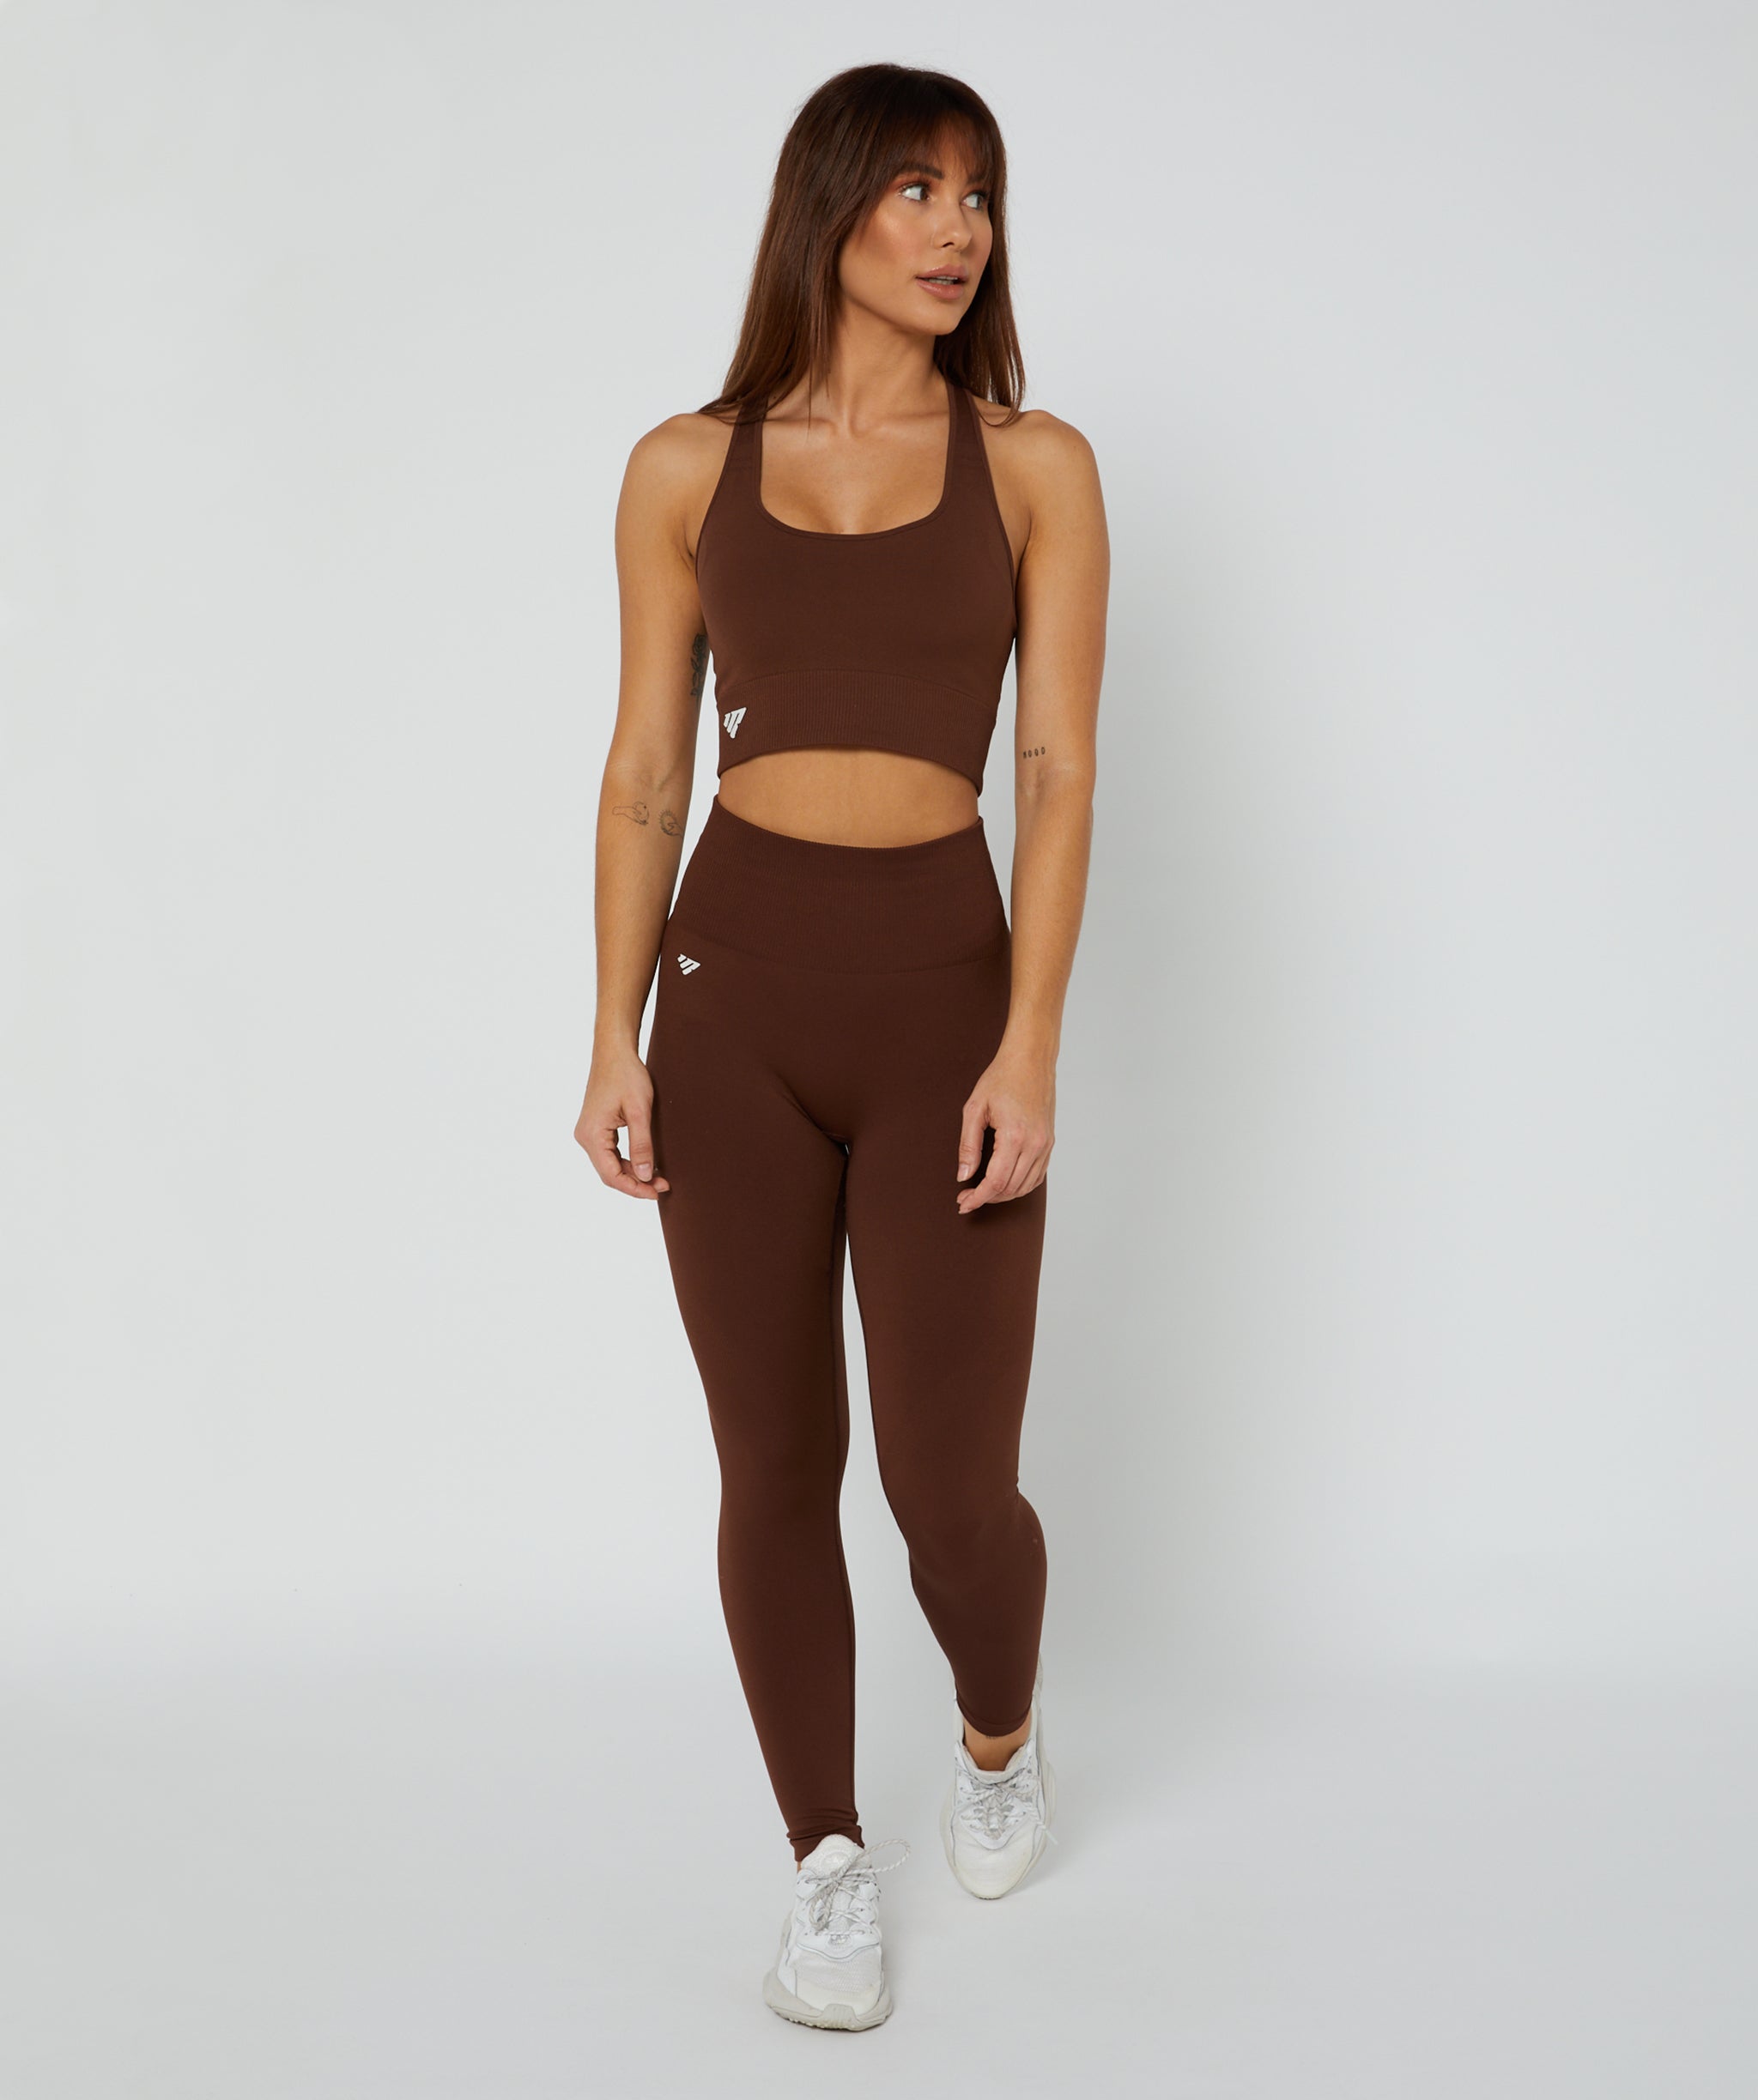 Luxe Seamless Sports Bra (Mocha) by OneMoreRep - Nutrition Warehouse